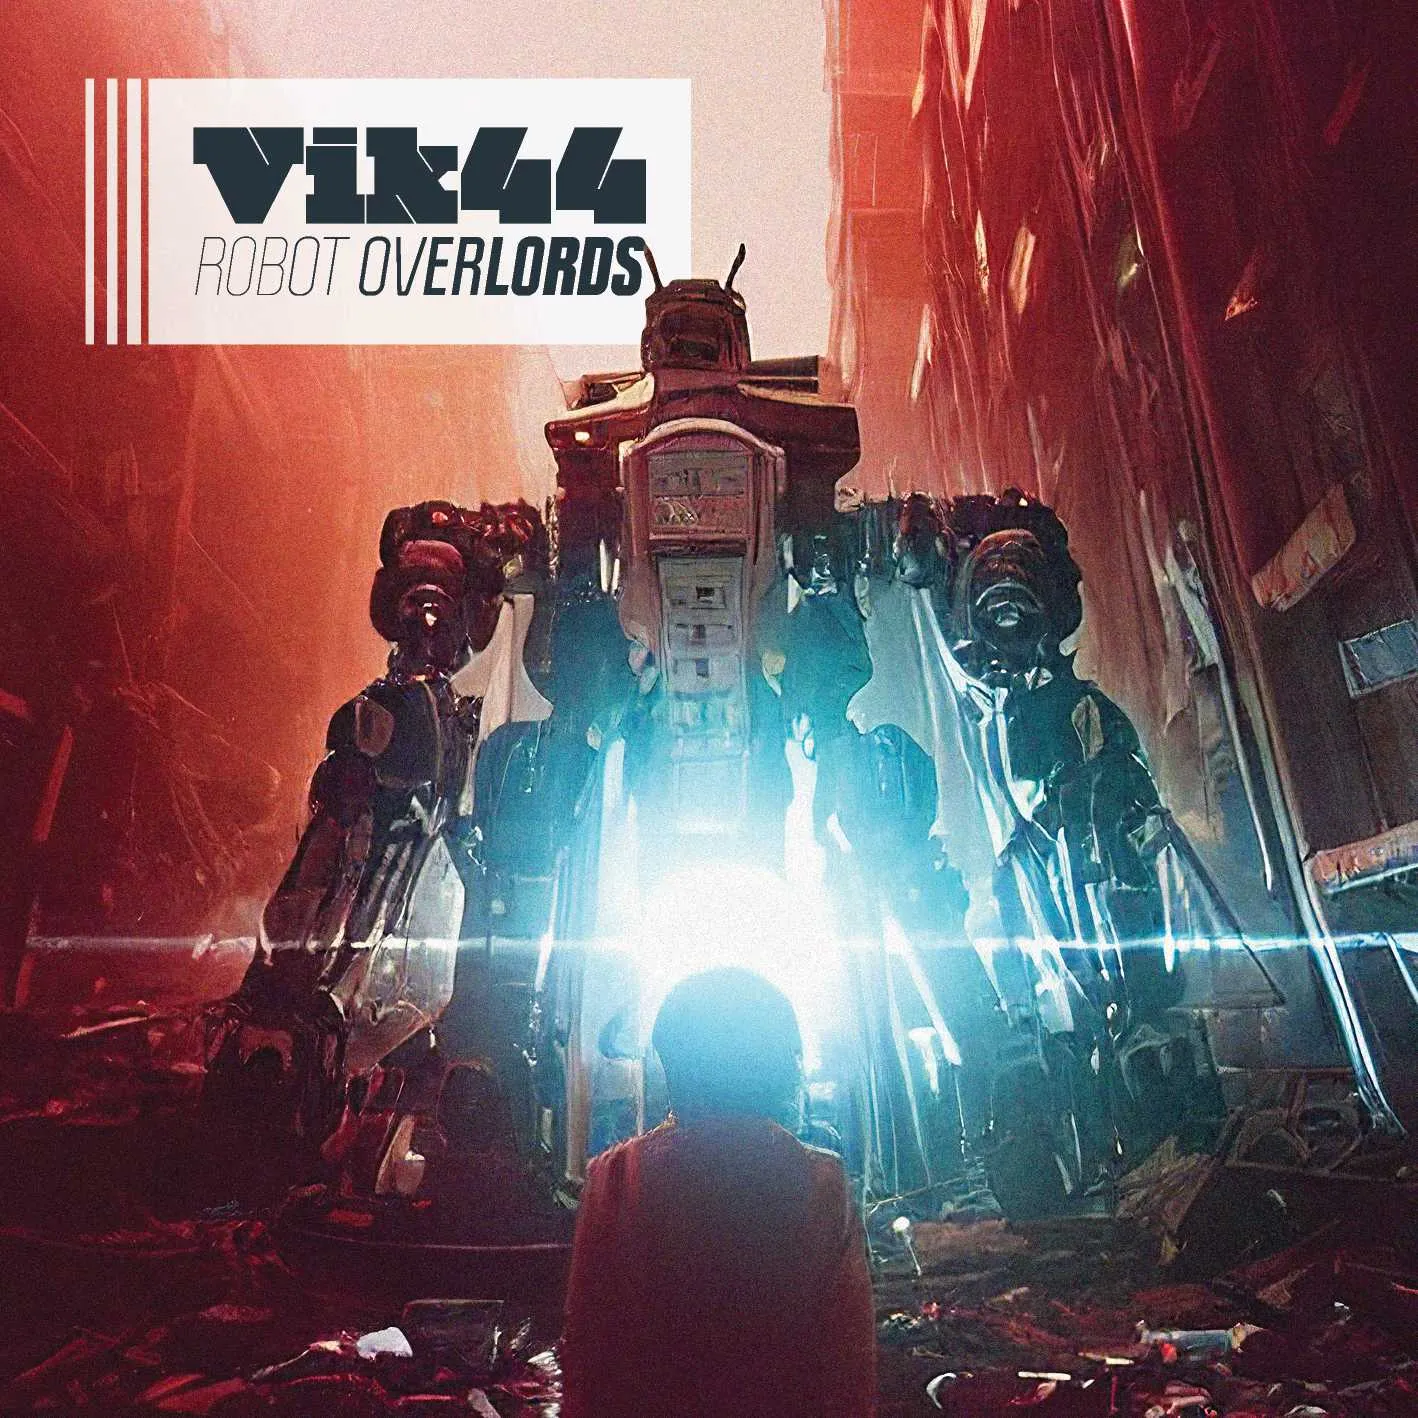 Album cover for “Robot Overlords” by Vik44